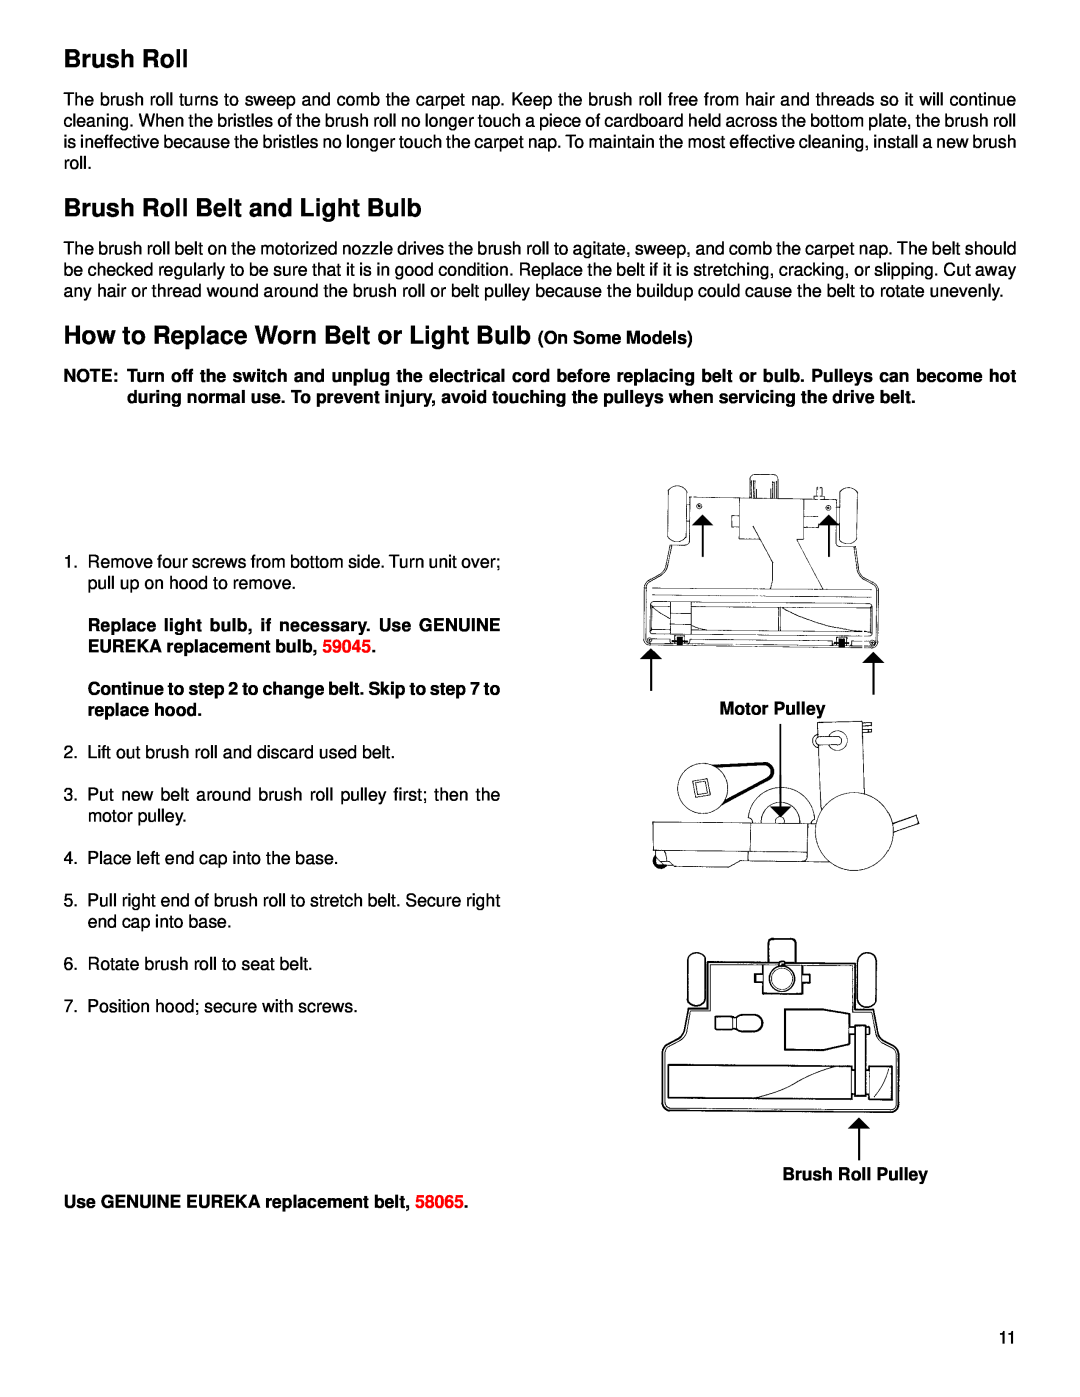 Eureka 6900 Brush Roll Belt and Light Bulb, How to Replace Worn Belt or Light Bulb On Some Models, Motor Pulley 